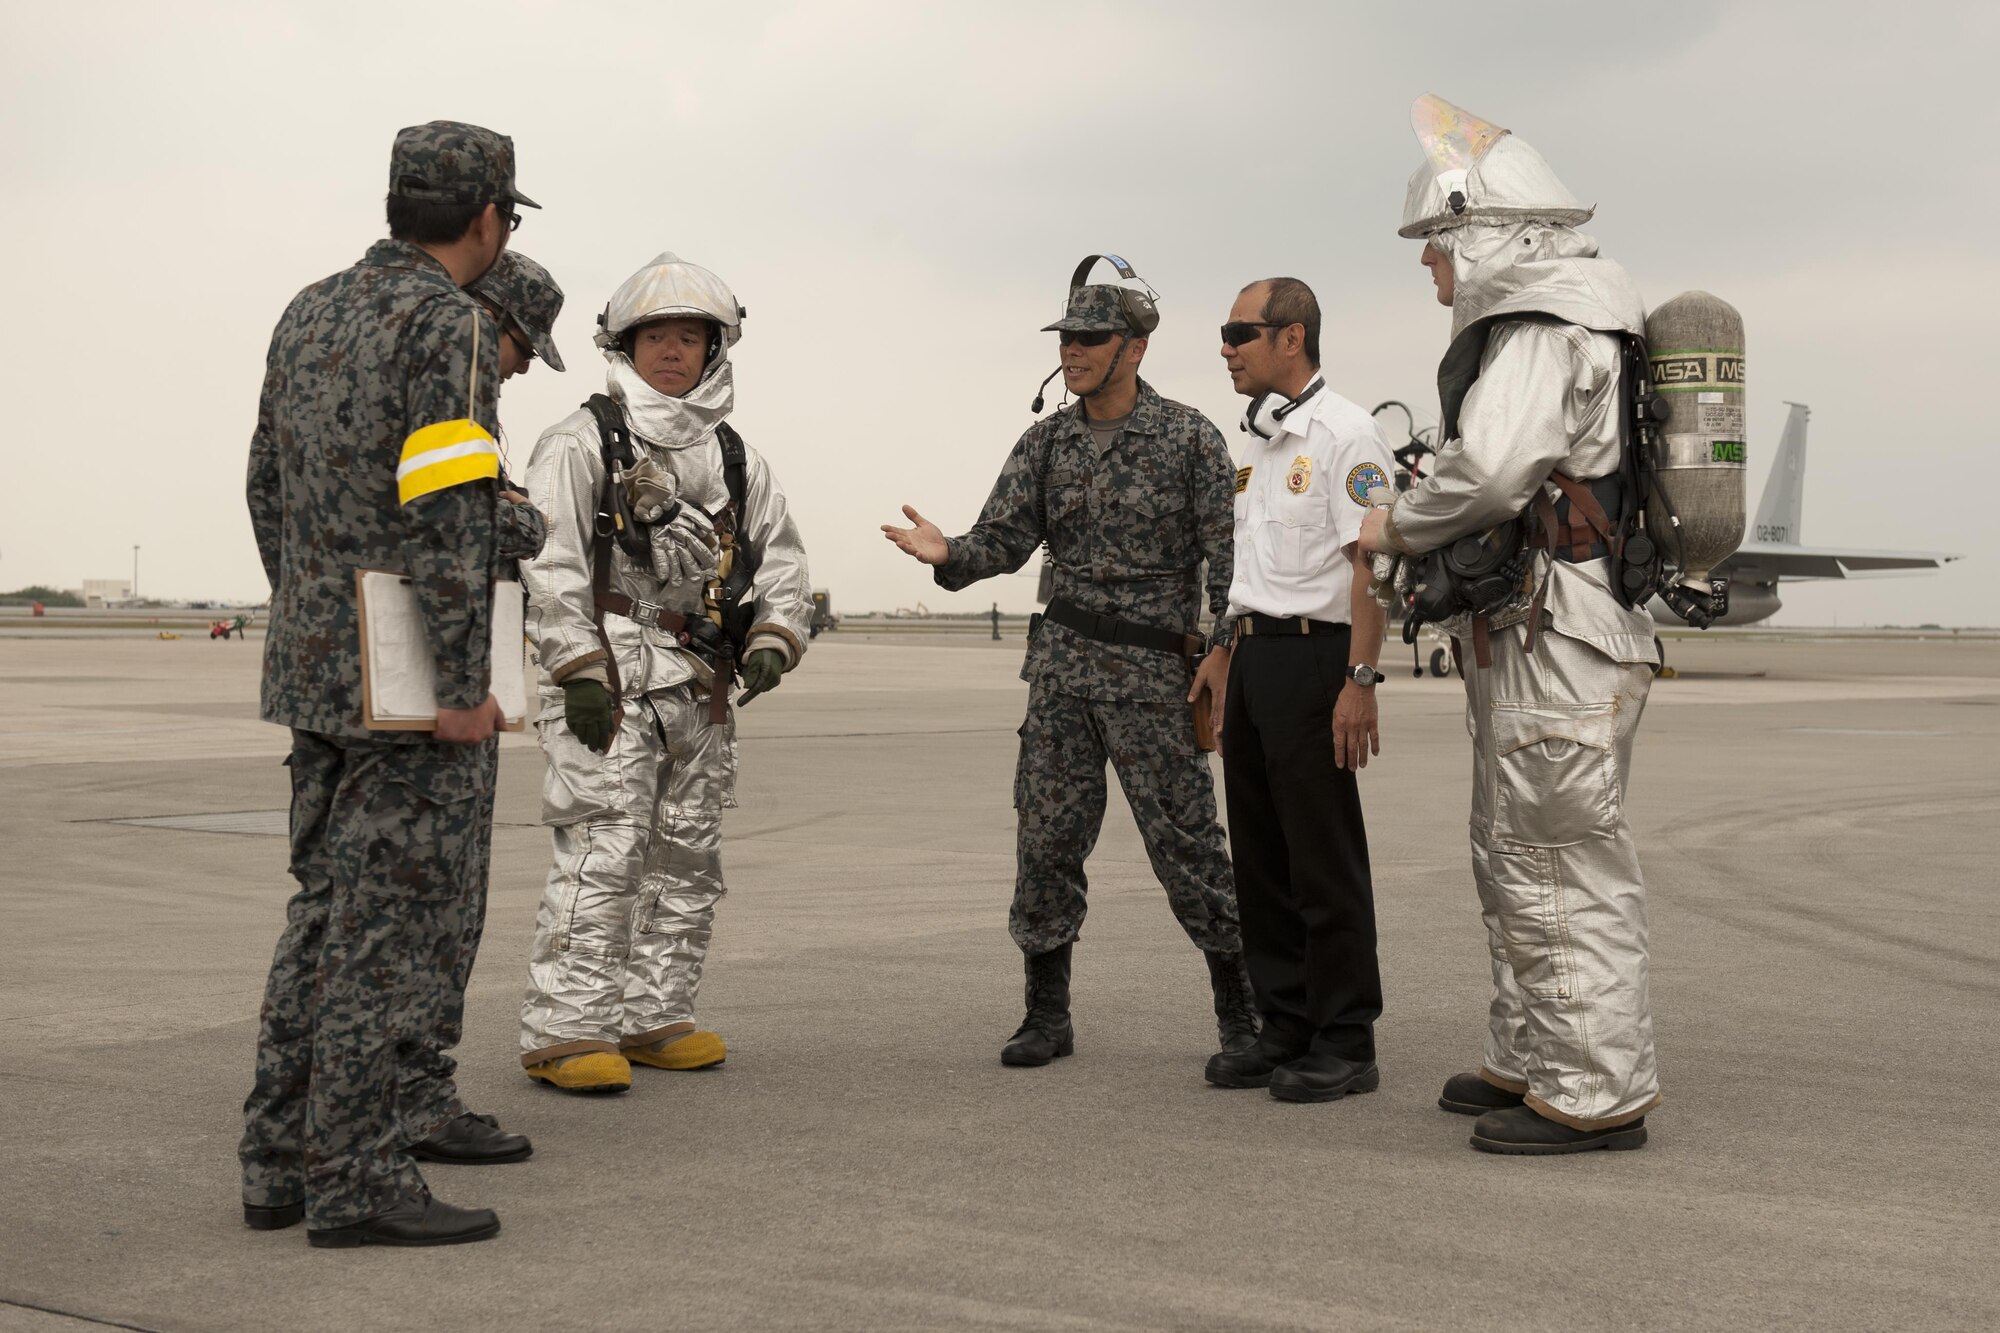 Japan Air Self-Defense Force 9th Wing members and U.S. Air Force 18th Civil Engineer Squadron firefighters conduct aircraft barrier recovery training March 15, 2016, at Naha Air Base, Japan. Bilateral training between the two nations enhanced unit interoperability should the need arise for Kadena Air Base to provide inflight emergency support for JASDF aircraft. (U.S. Air Force photo by Senior Airman Peter Reft)